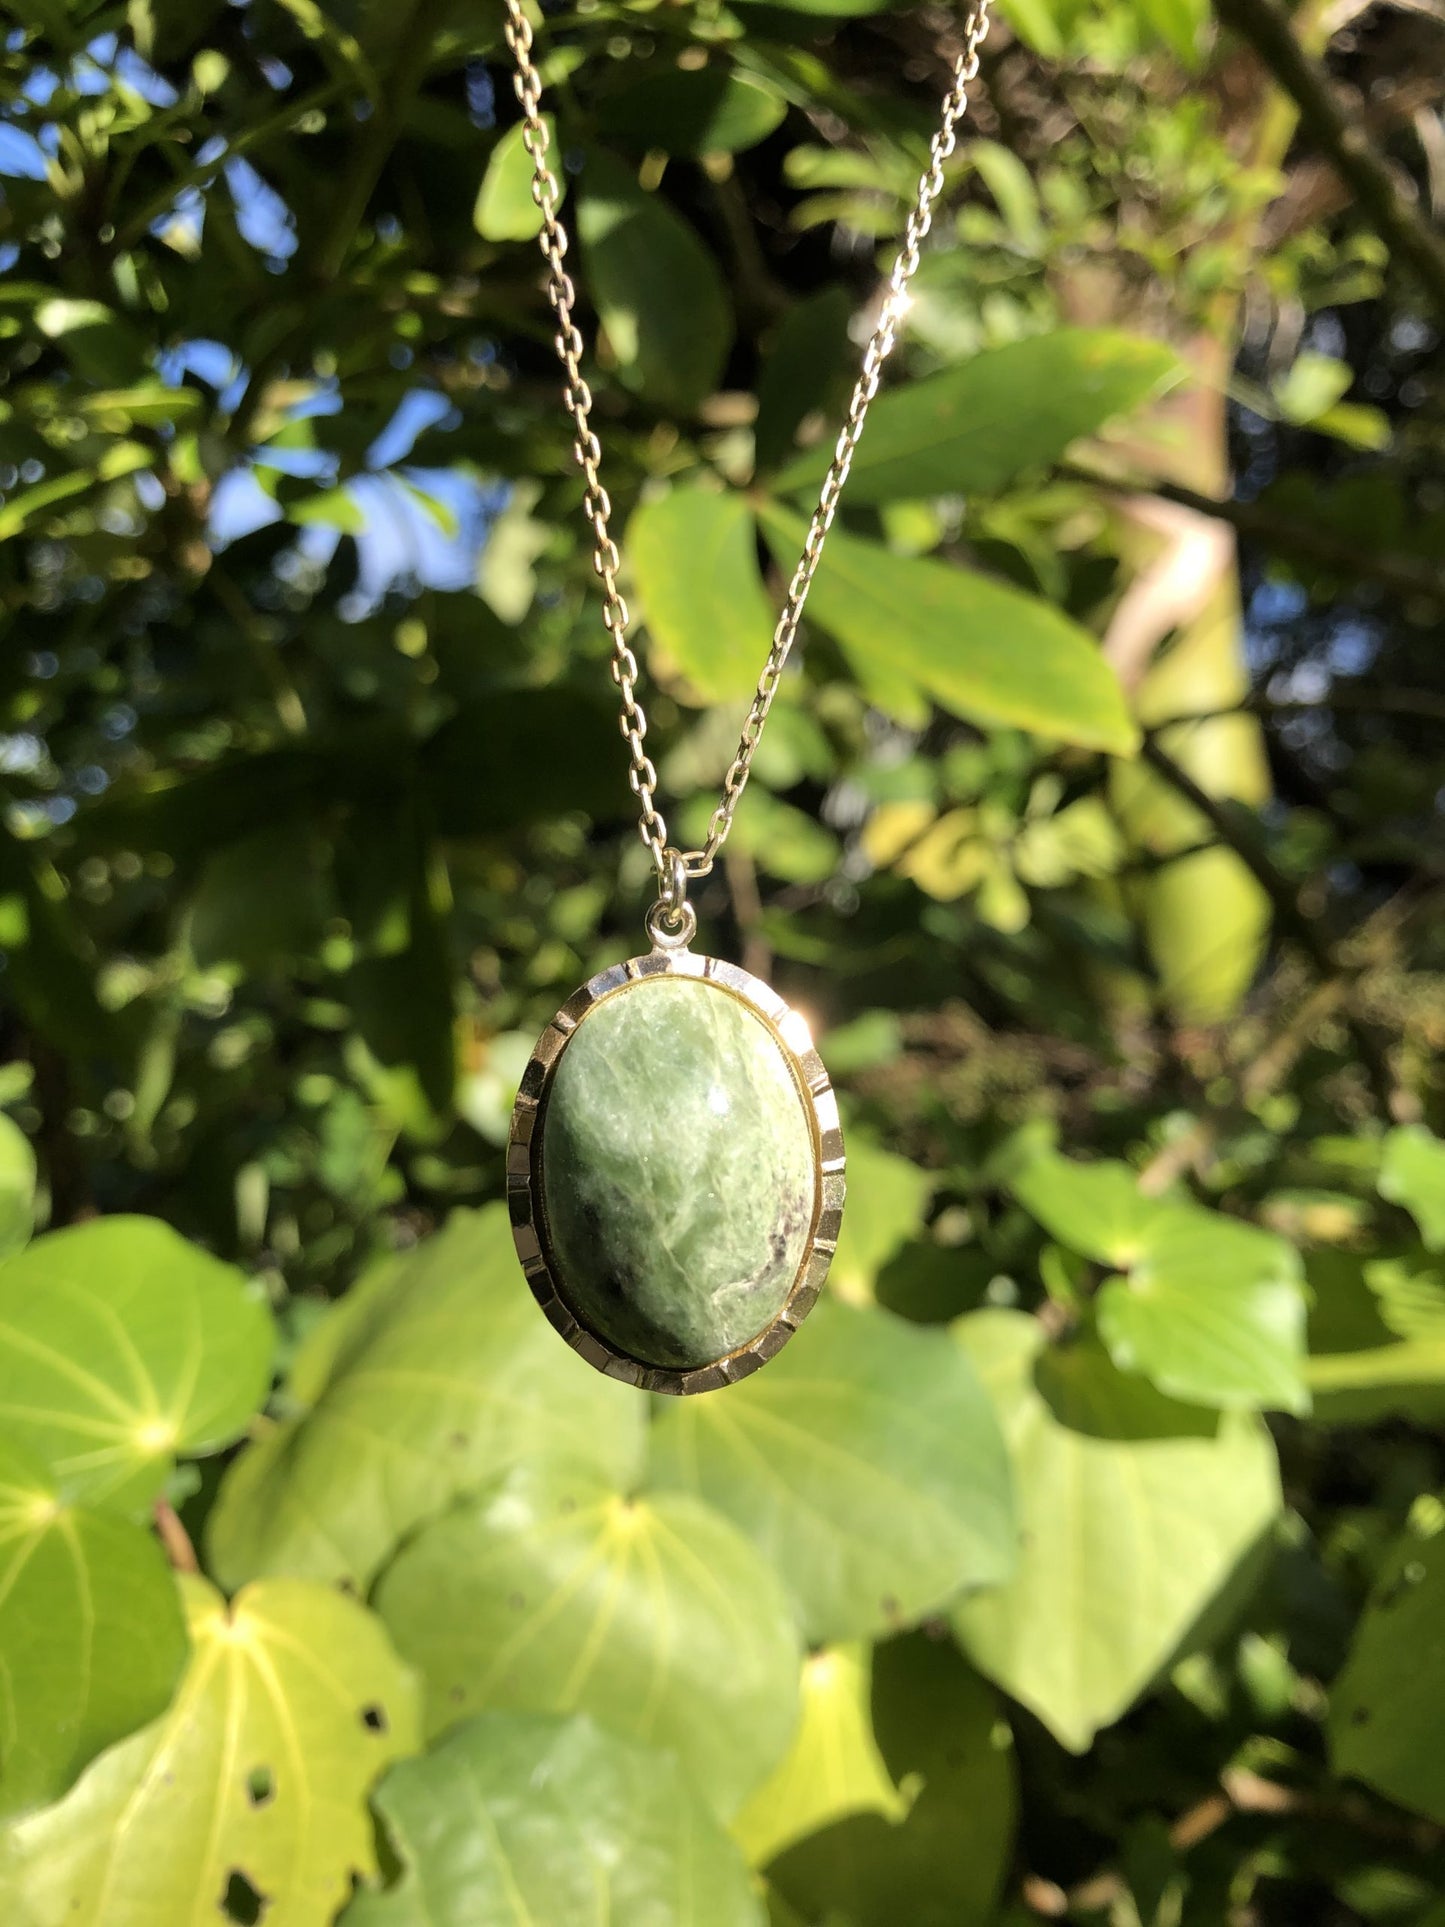 Necklace with natural New Zealand serpentine, green with subtle markings, hand polished to a 25x18mm cabochon and set in a gold plated setting with 19 inch chain, on bush